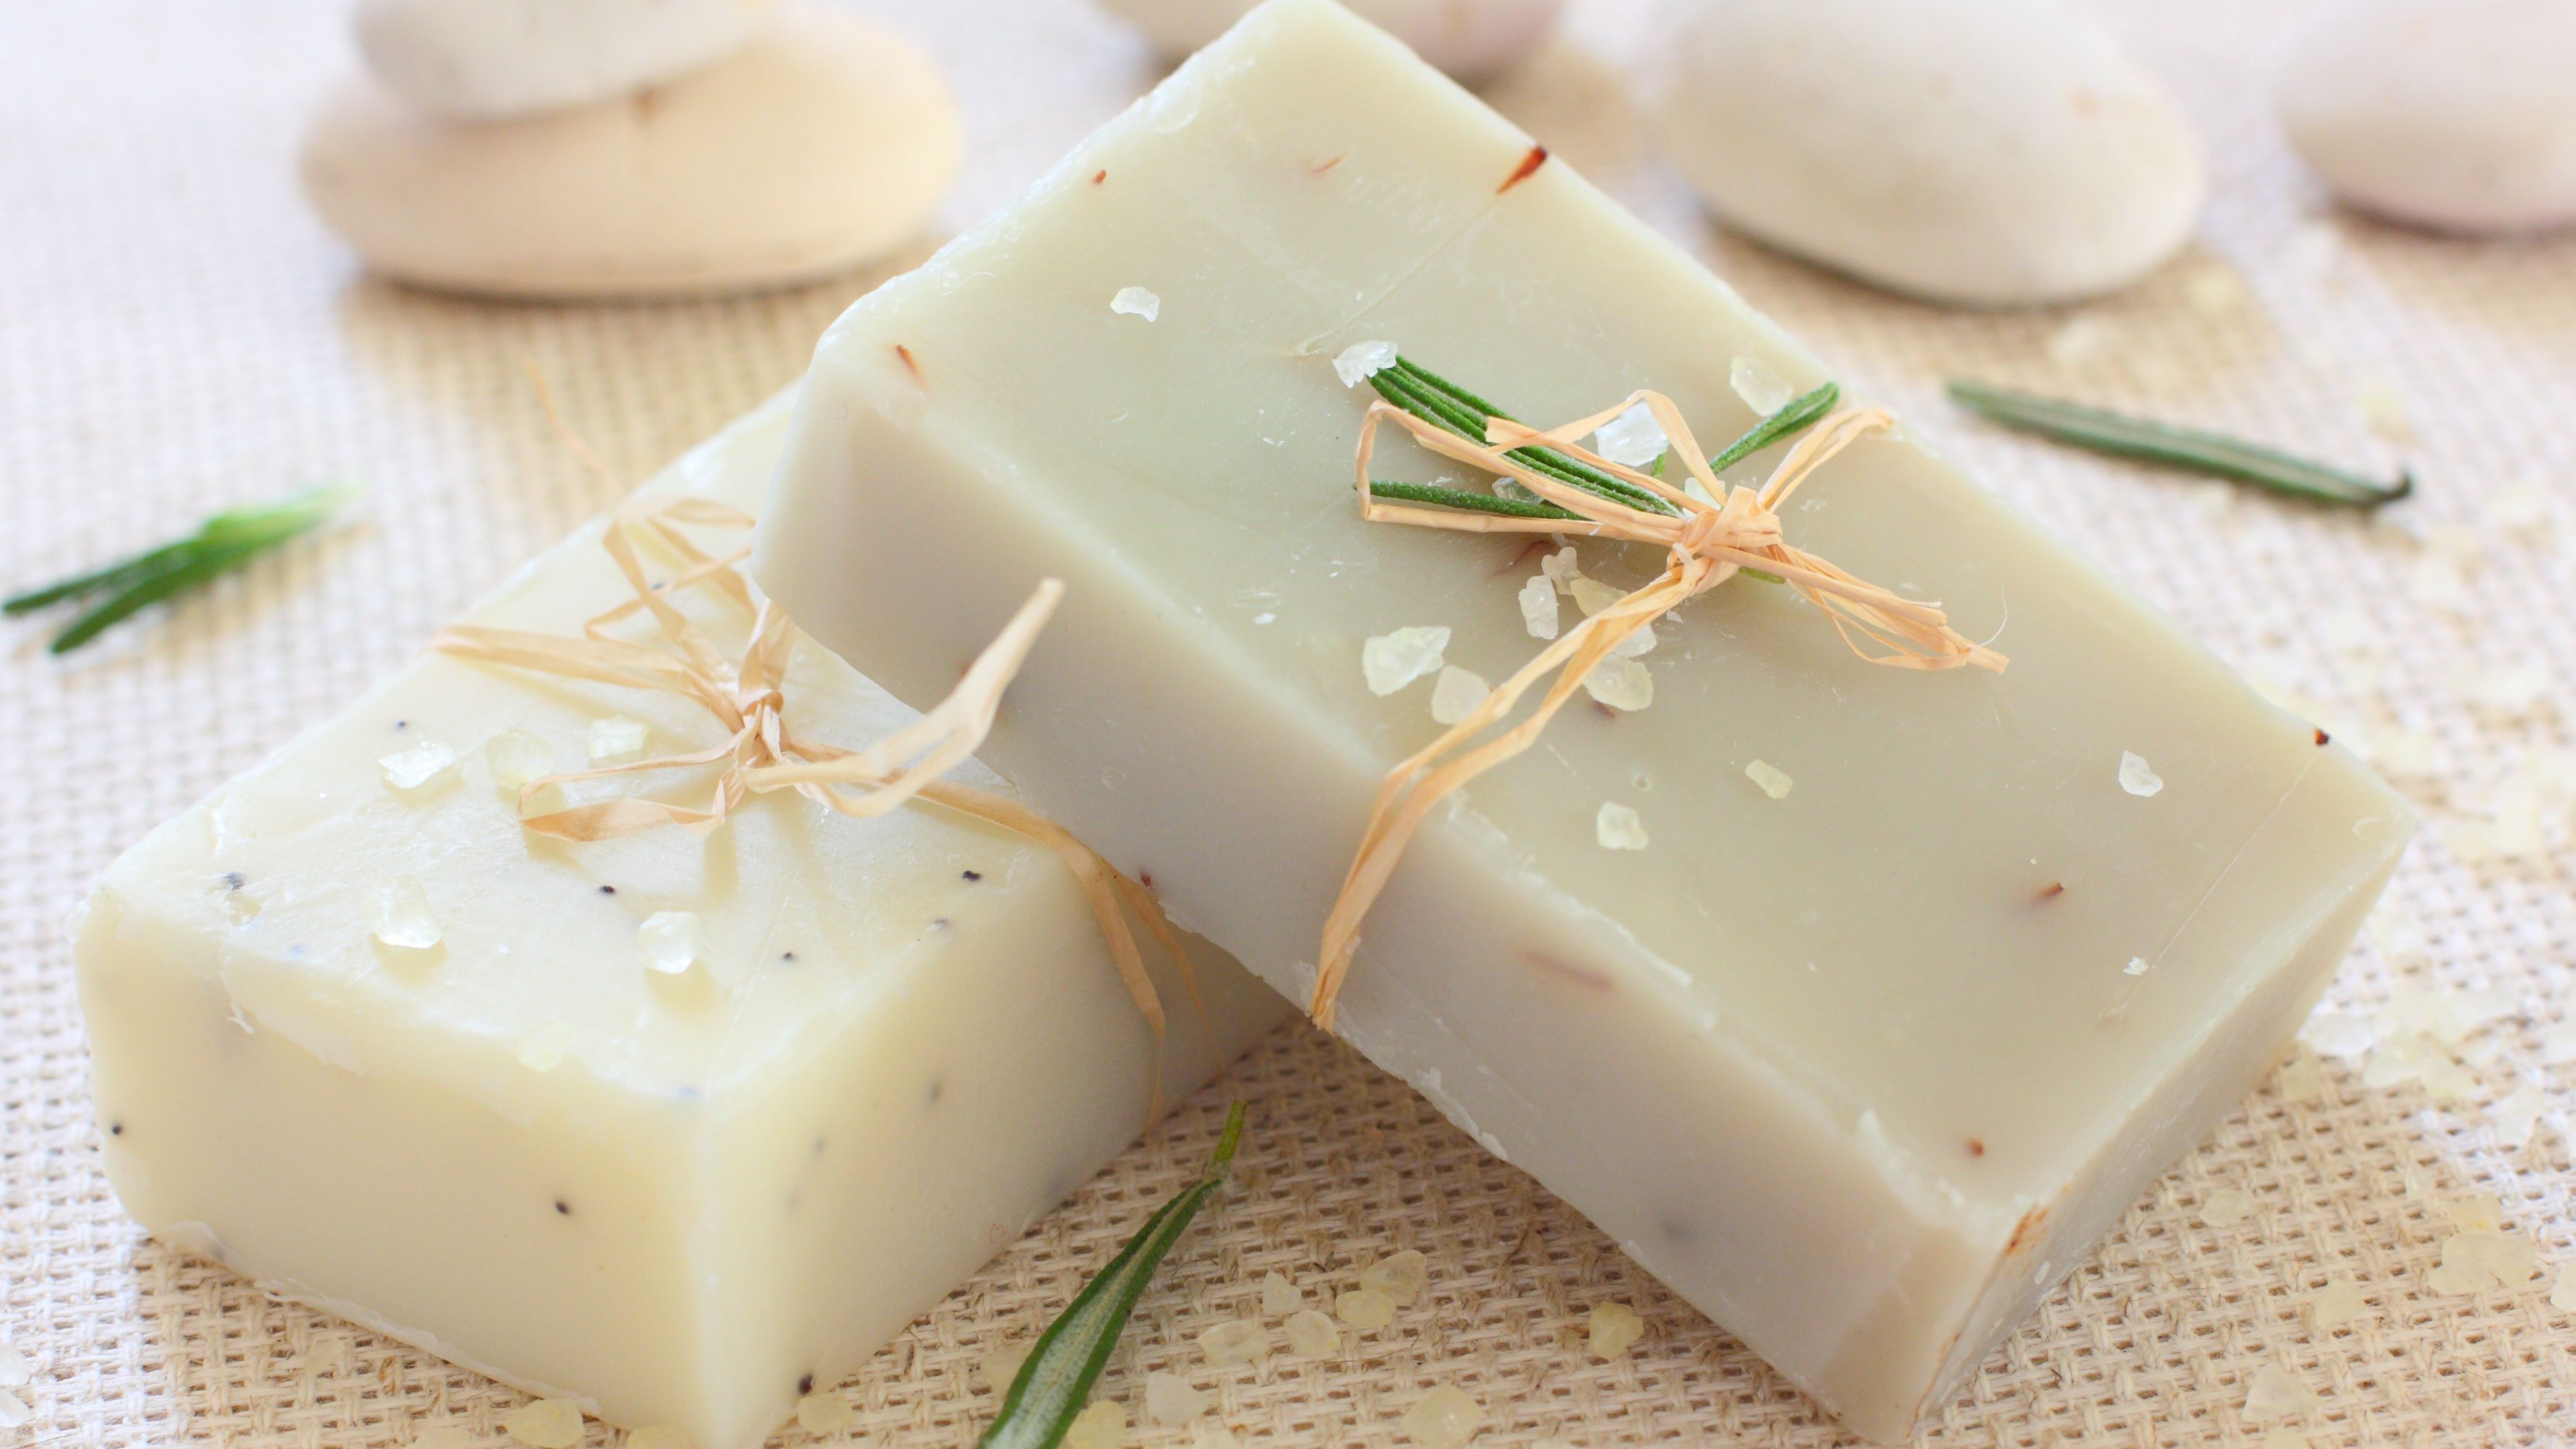 What Are Some Unique Rewards of Using Handmade Soap?